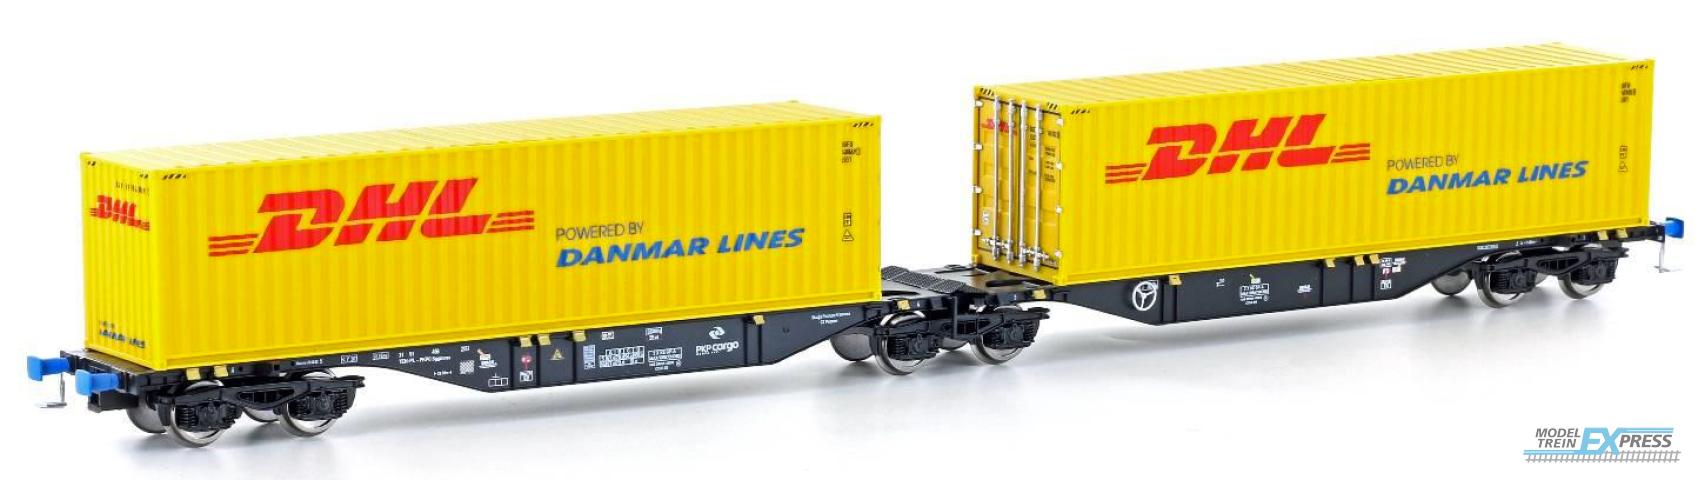 Mehano 58955 Containerwagen Sggmrs90 m. DHL Container